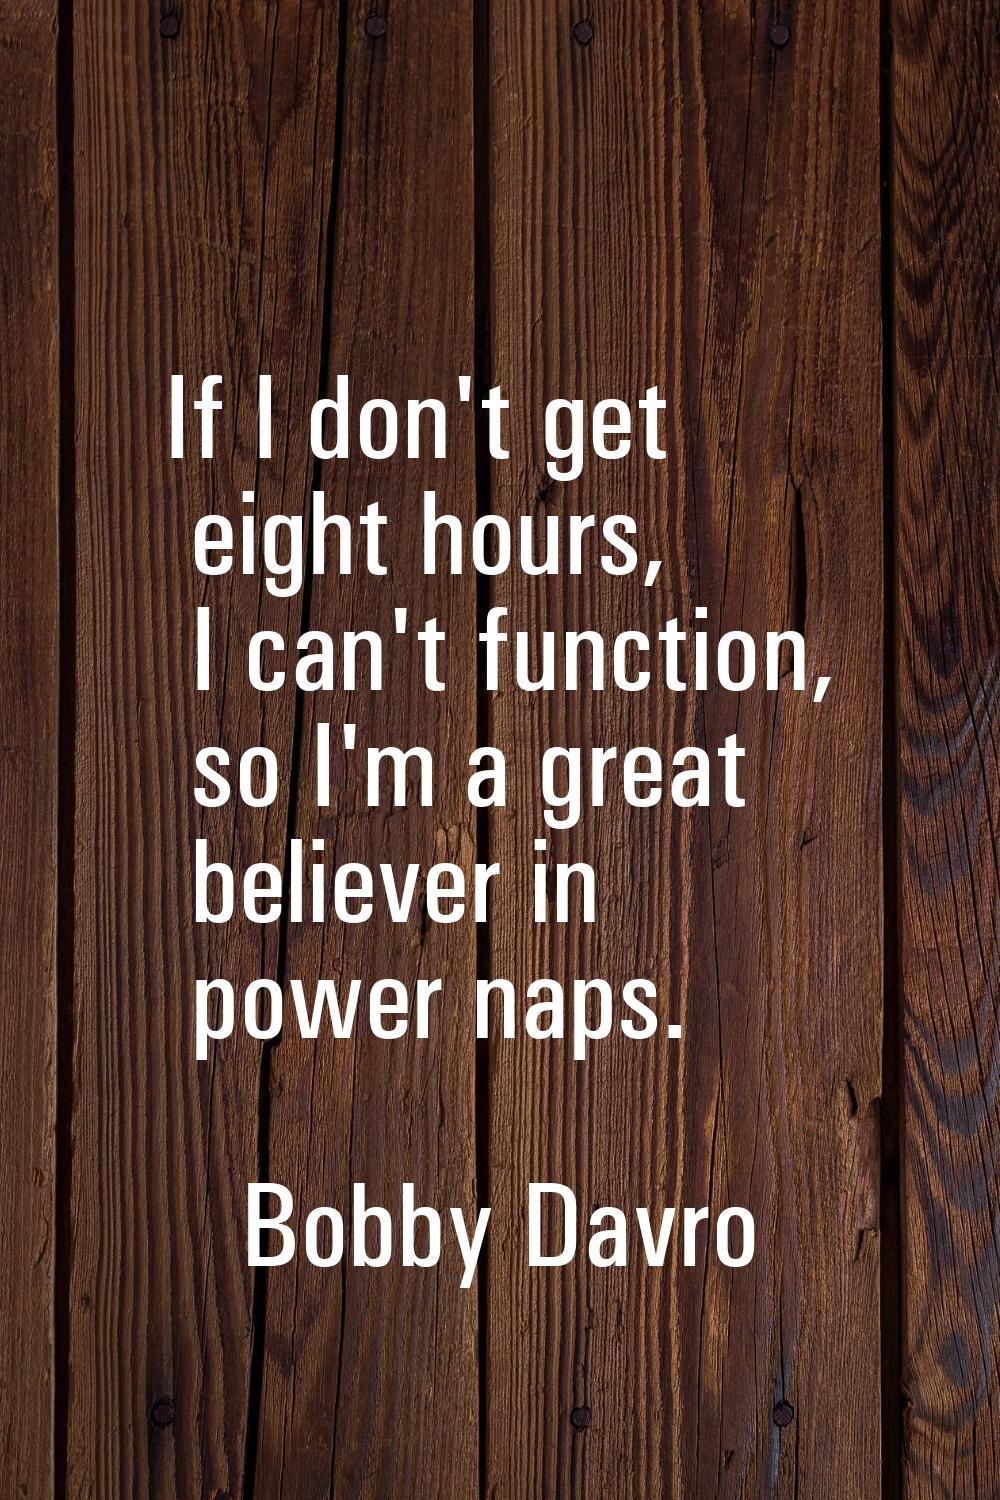 If I don't get eight hours, I can't function, so I'm a great believer in power naps.